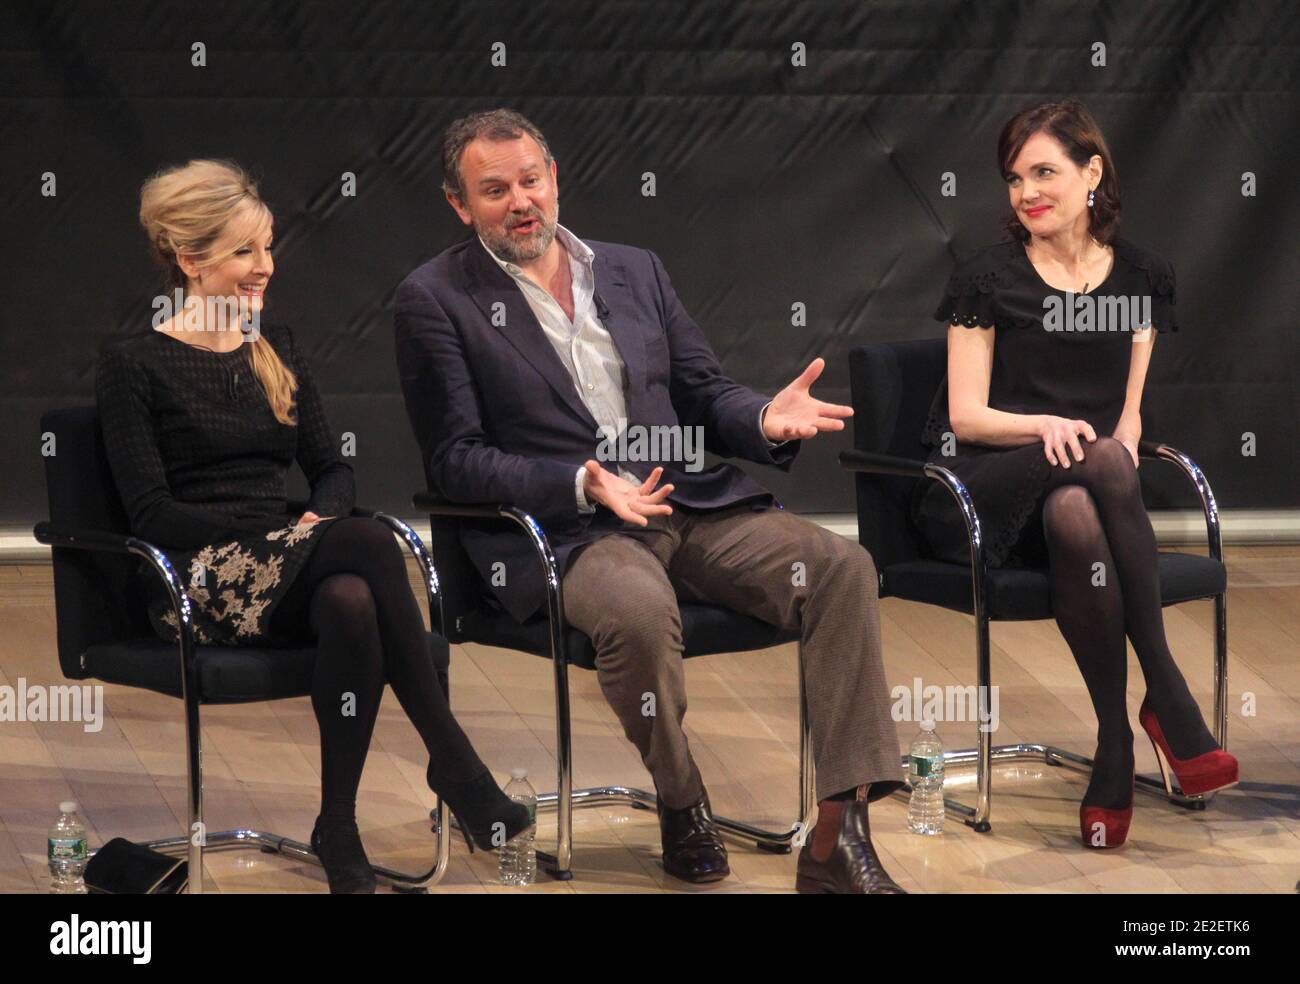 Cast members Hugh Bonneville, Joanne Froggatt and Elizabeth McGovern attend special screening of season two of the award winning drama tv series 'Downton Abbey' at Times Center in New York City, NY, USA on December 15, 2011. Downton Abbey has bagged four nominations for Golden Globe awards. Photo by Charles Guerin/ABACAPRESS.COM Stock Photo